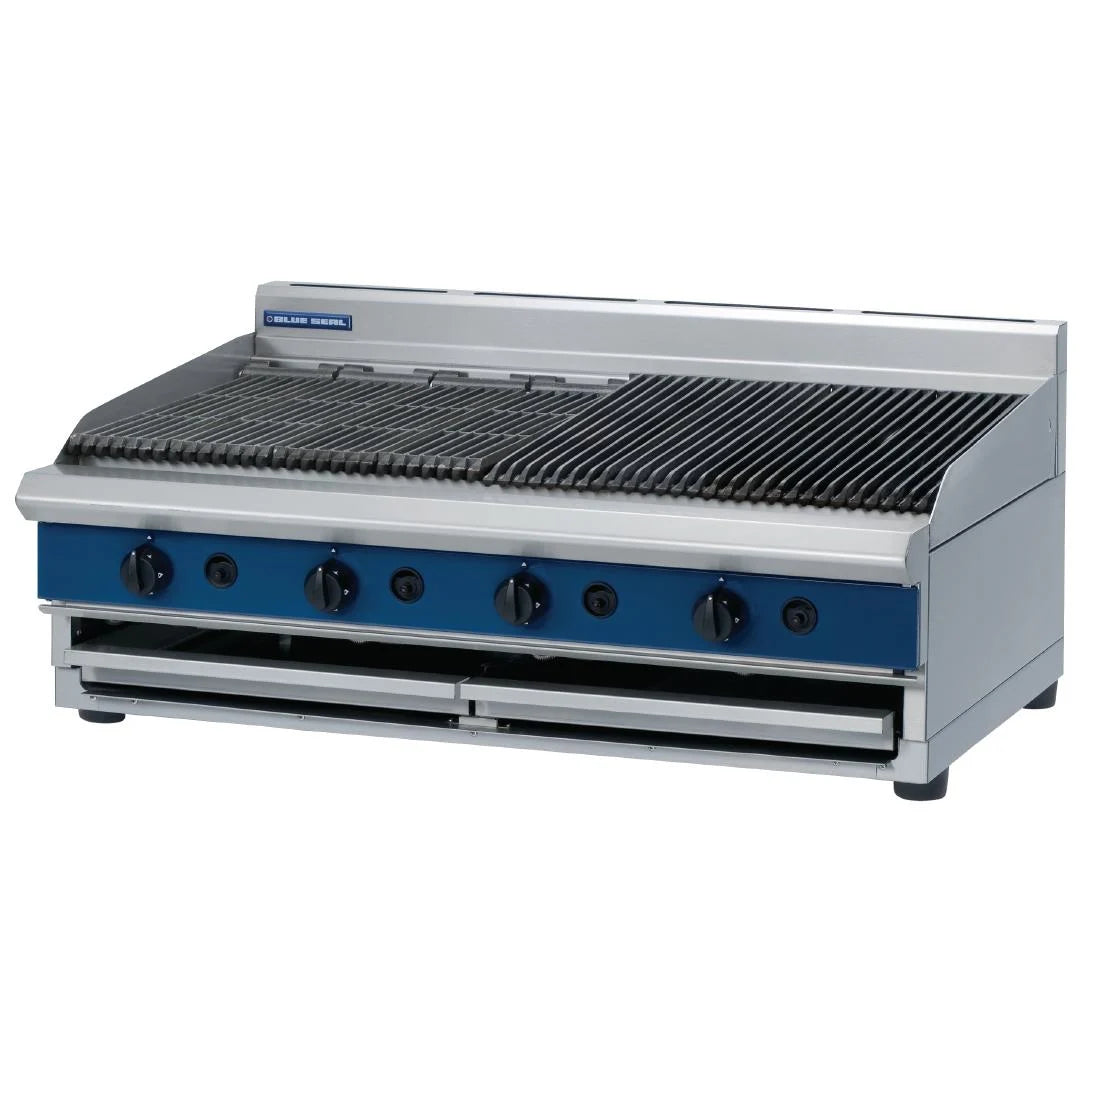 Blue Seal Countertop Chargrill Natural Gas G598 B.Product ref:00361.Model:G598B. 🚚 3-5 Days Delivery